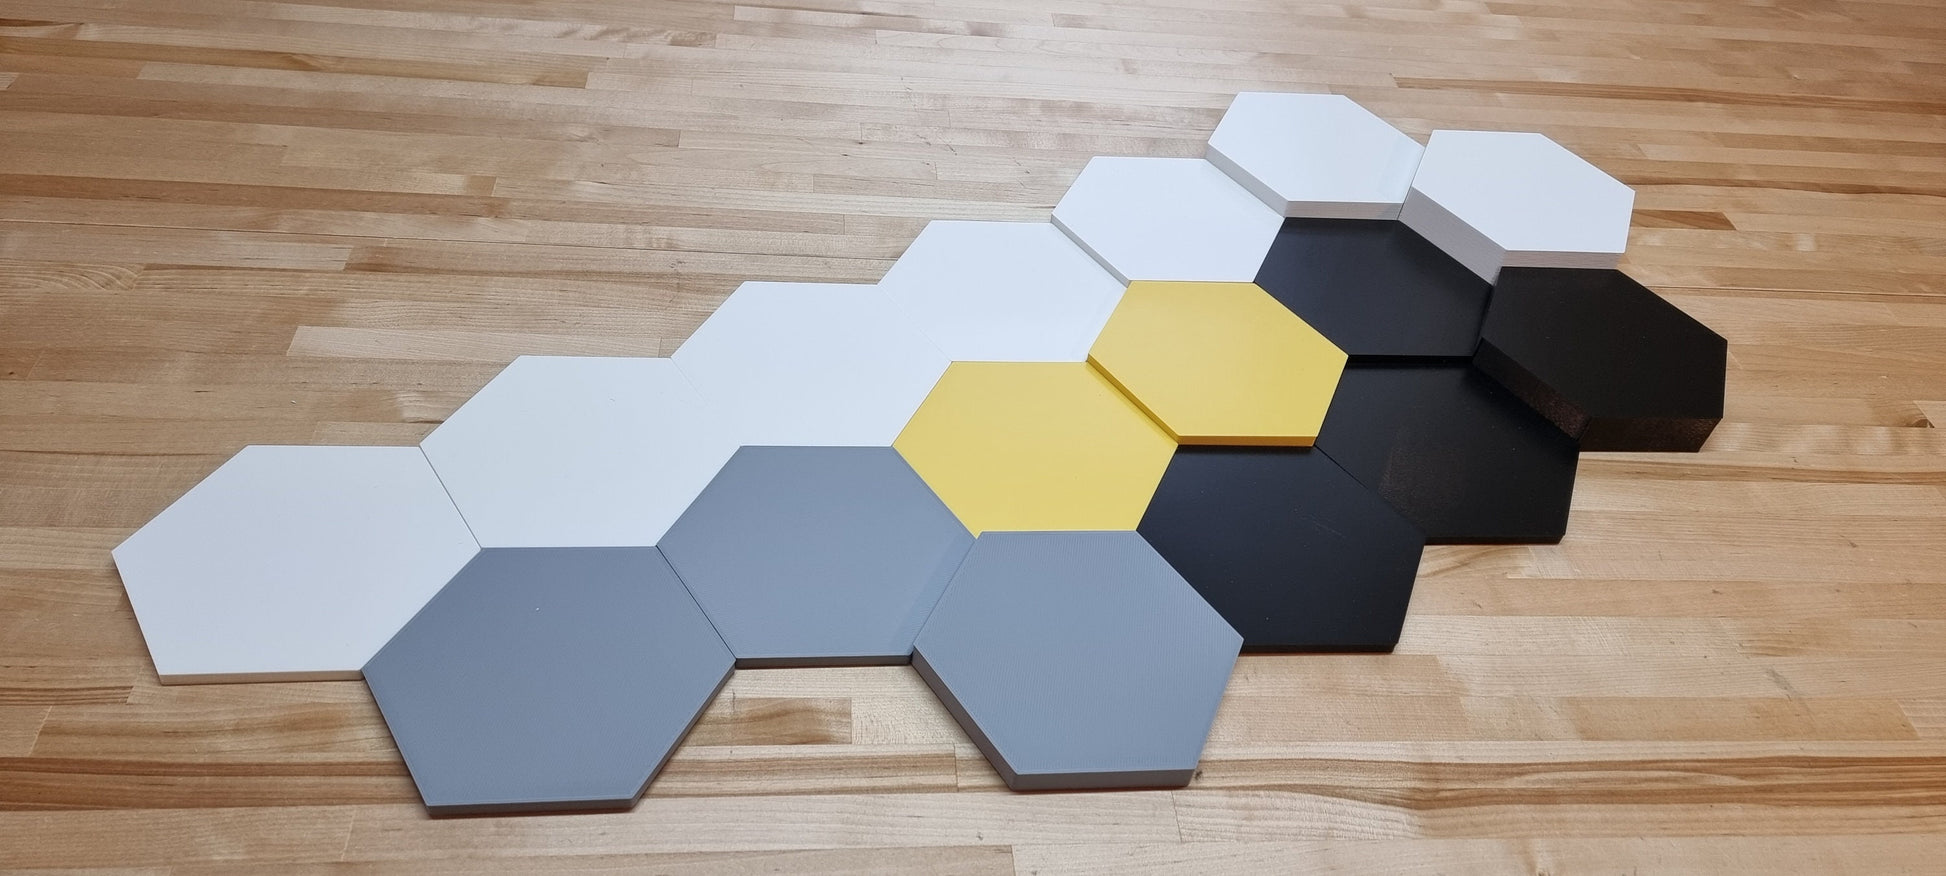 3D Hexagon Wall Tiles In Tons of Sizes & Colors! Get A Modern Honeycomb Look With 4in Wide 3D Hexagon Wall Tiles